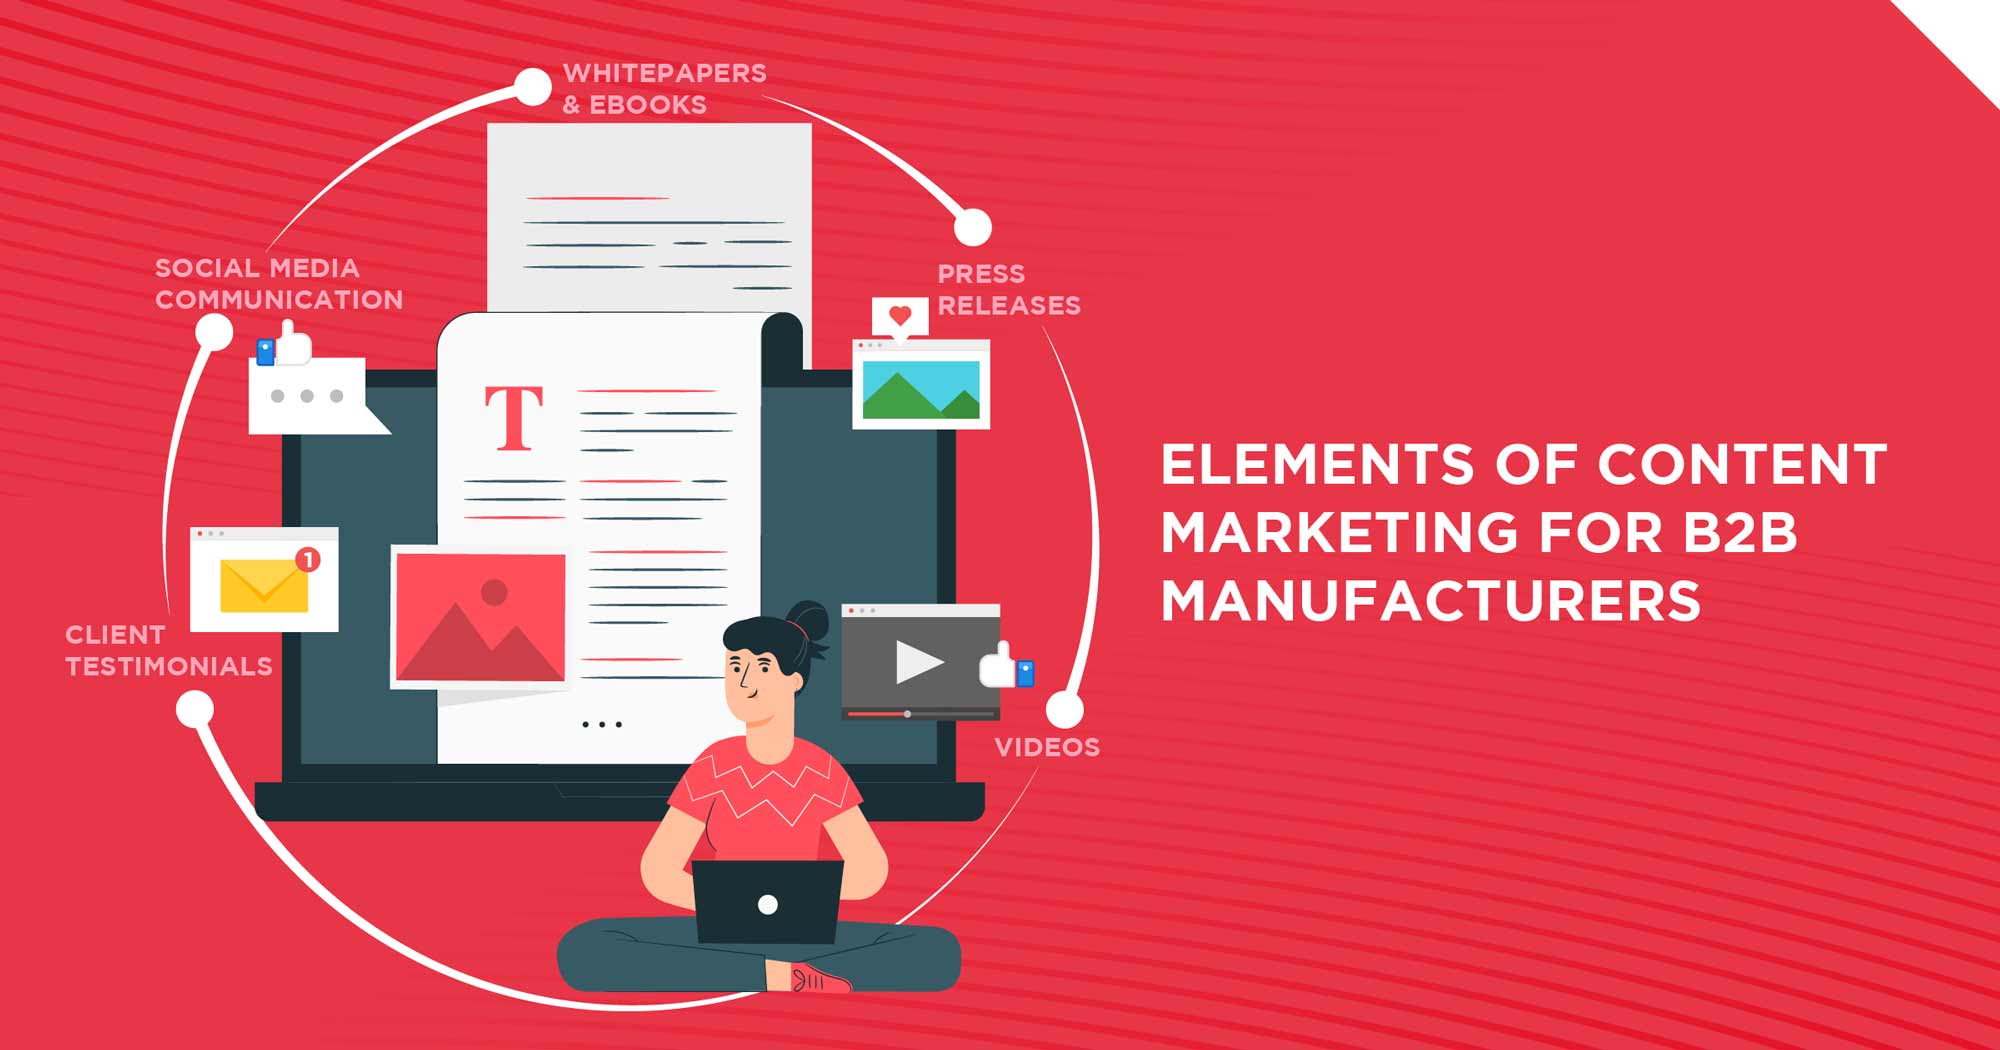 Elements of Content Marketing for B2B